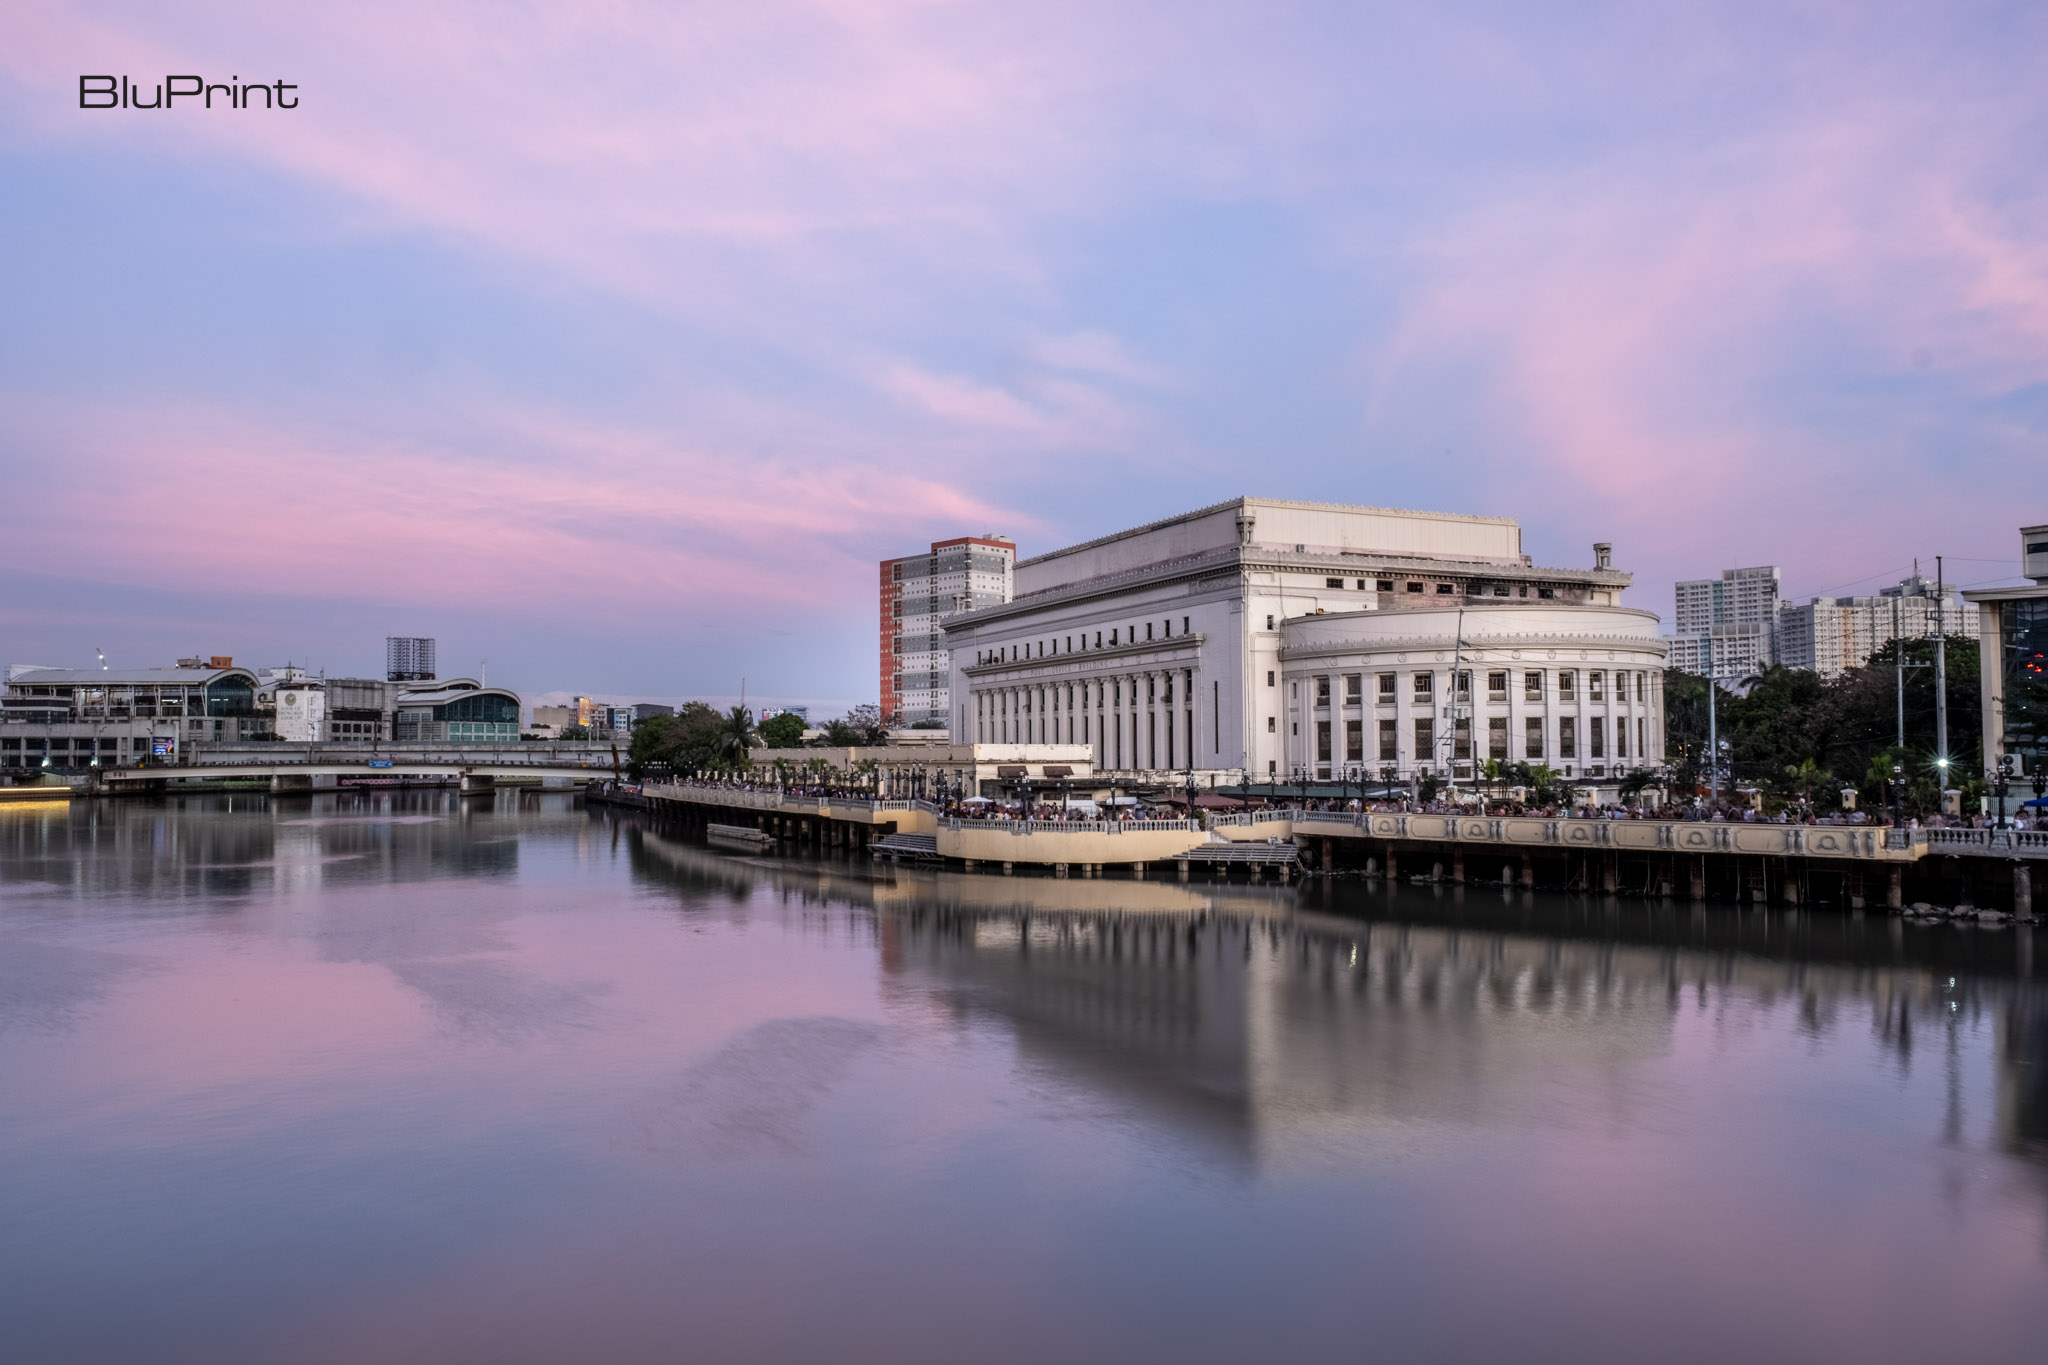 A view of the Manila Central Post Office along the Pasig River.